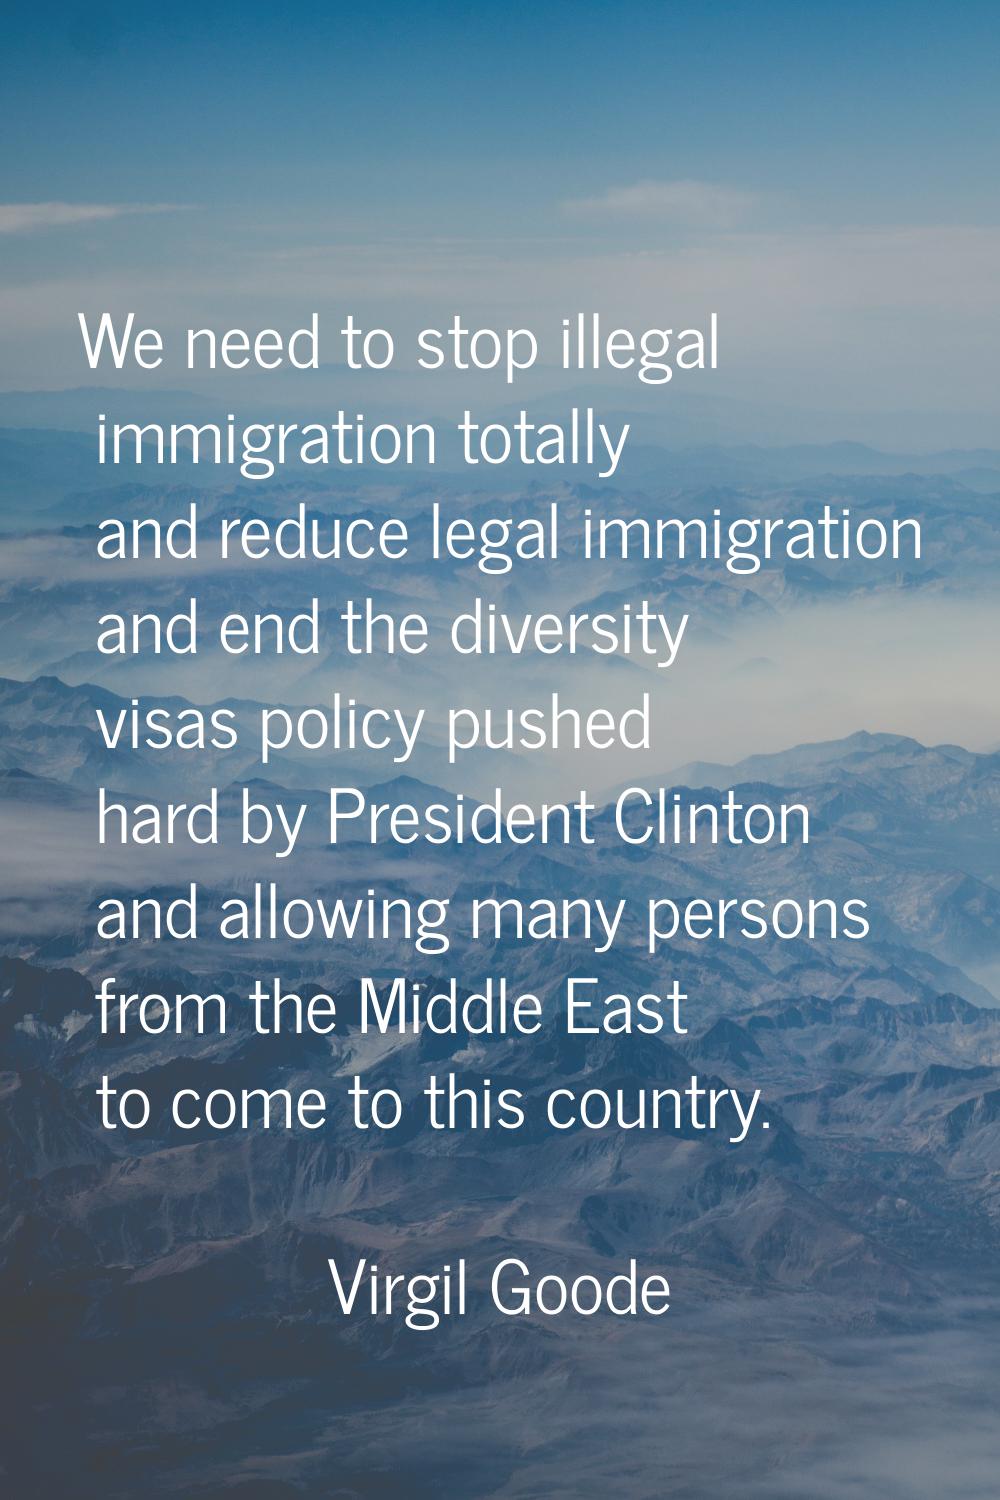 We need to stop illegal immigration totally and reduce legal immigration and end the diversity visa